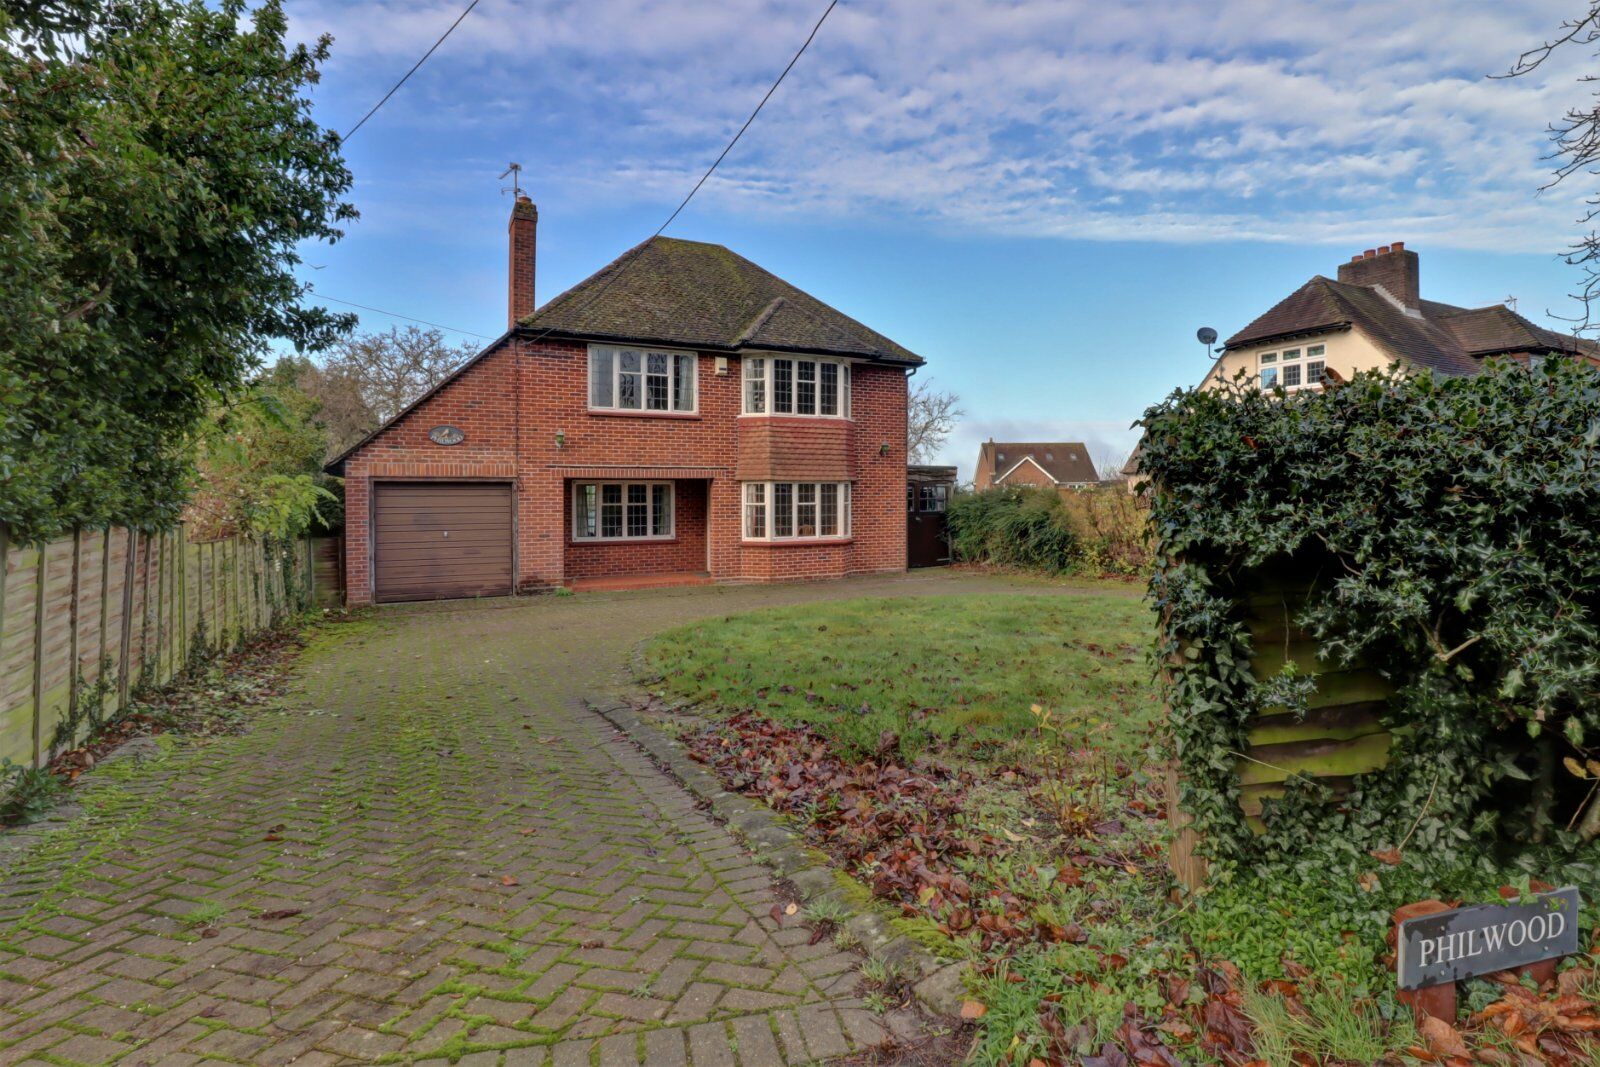 3 bedroom detached house for sale Aylesbury Road, Princes Risborough, HP27, main image